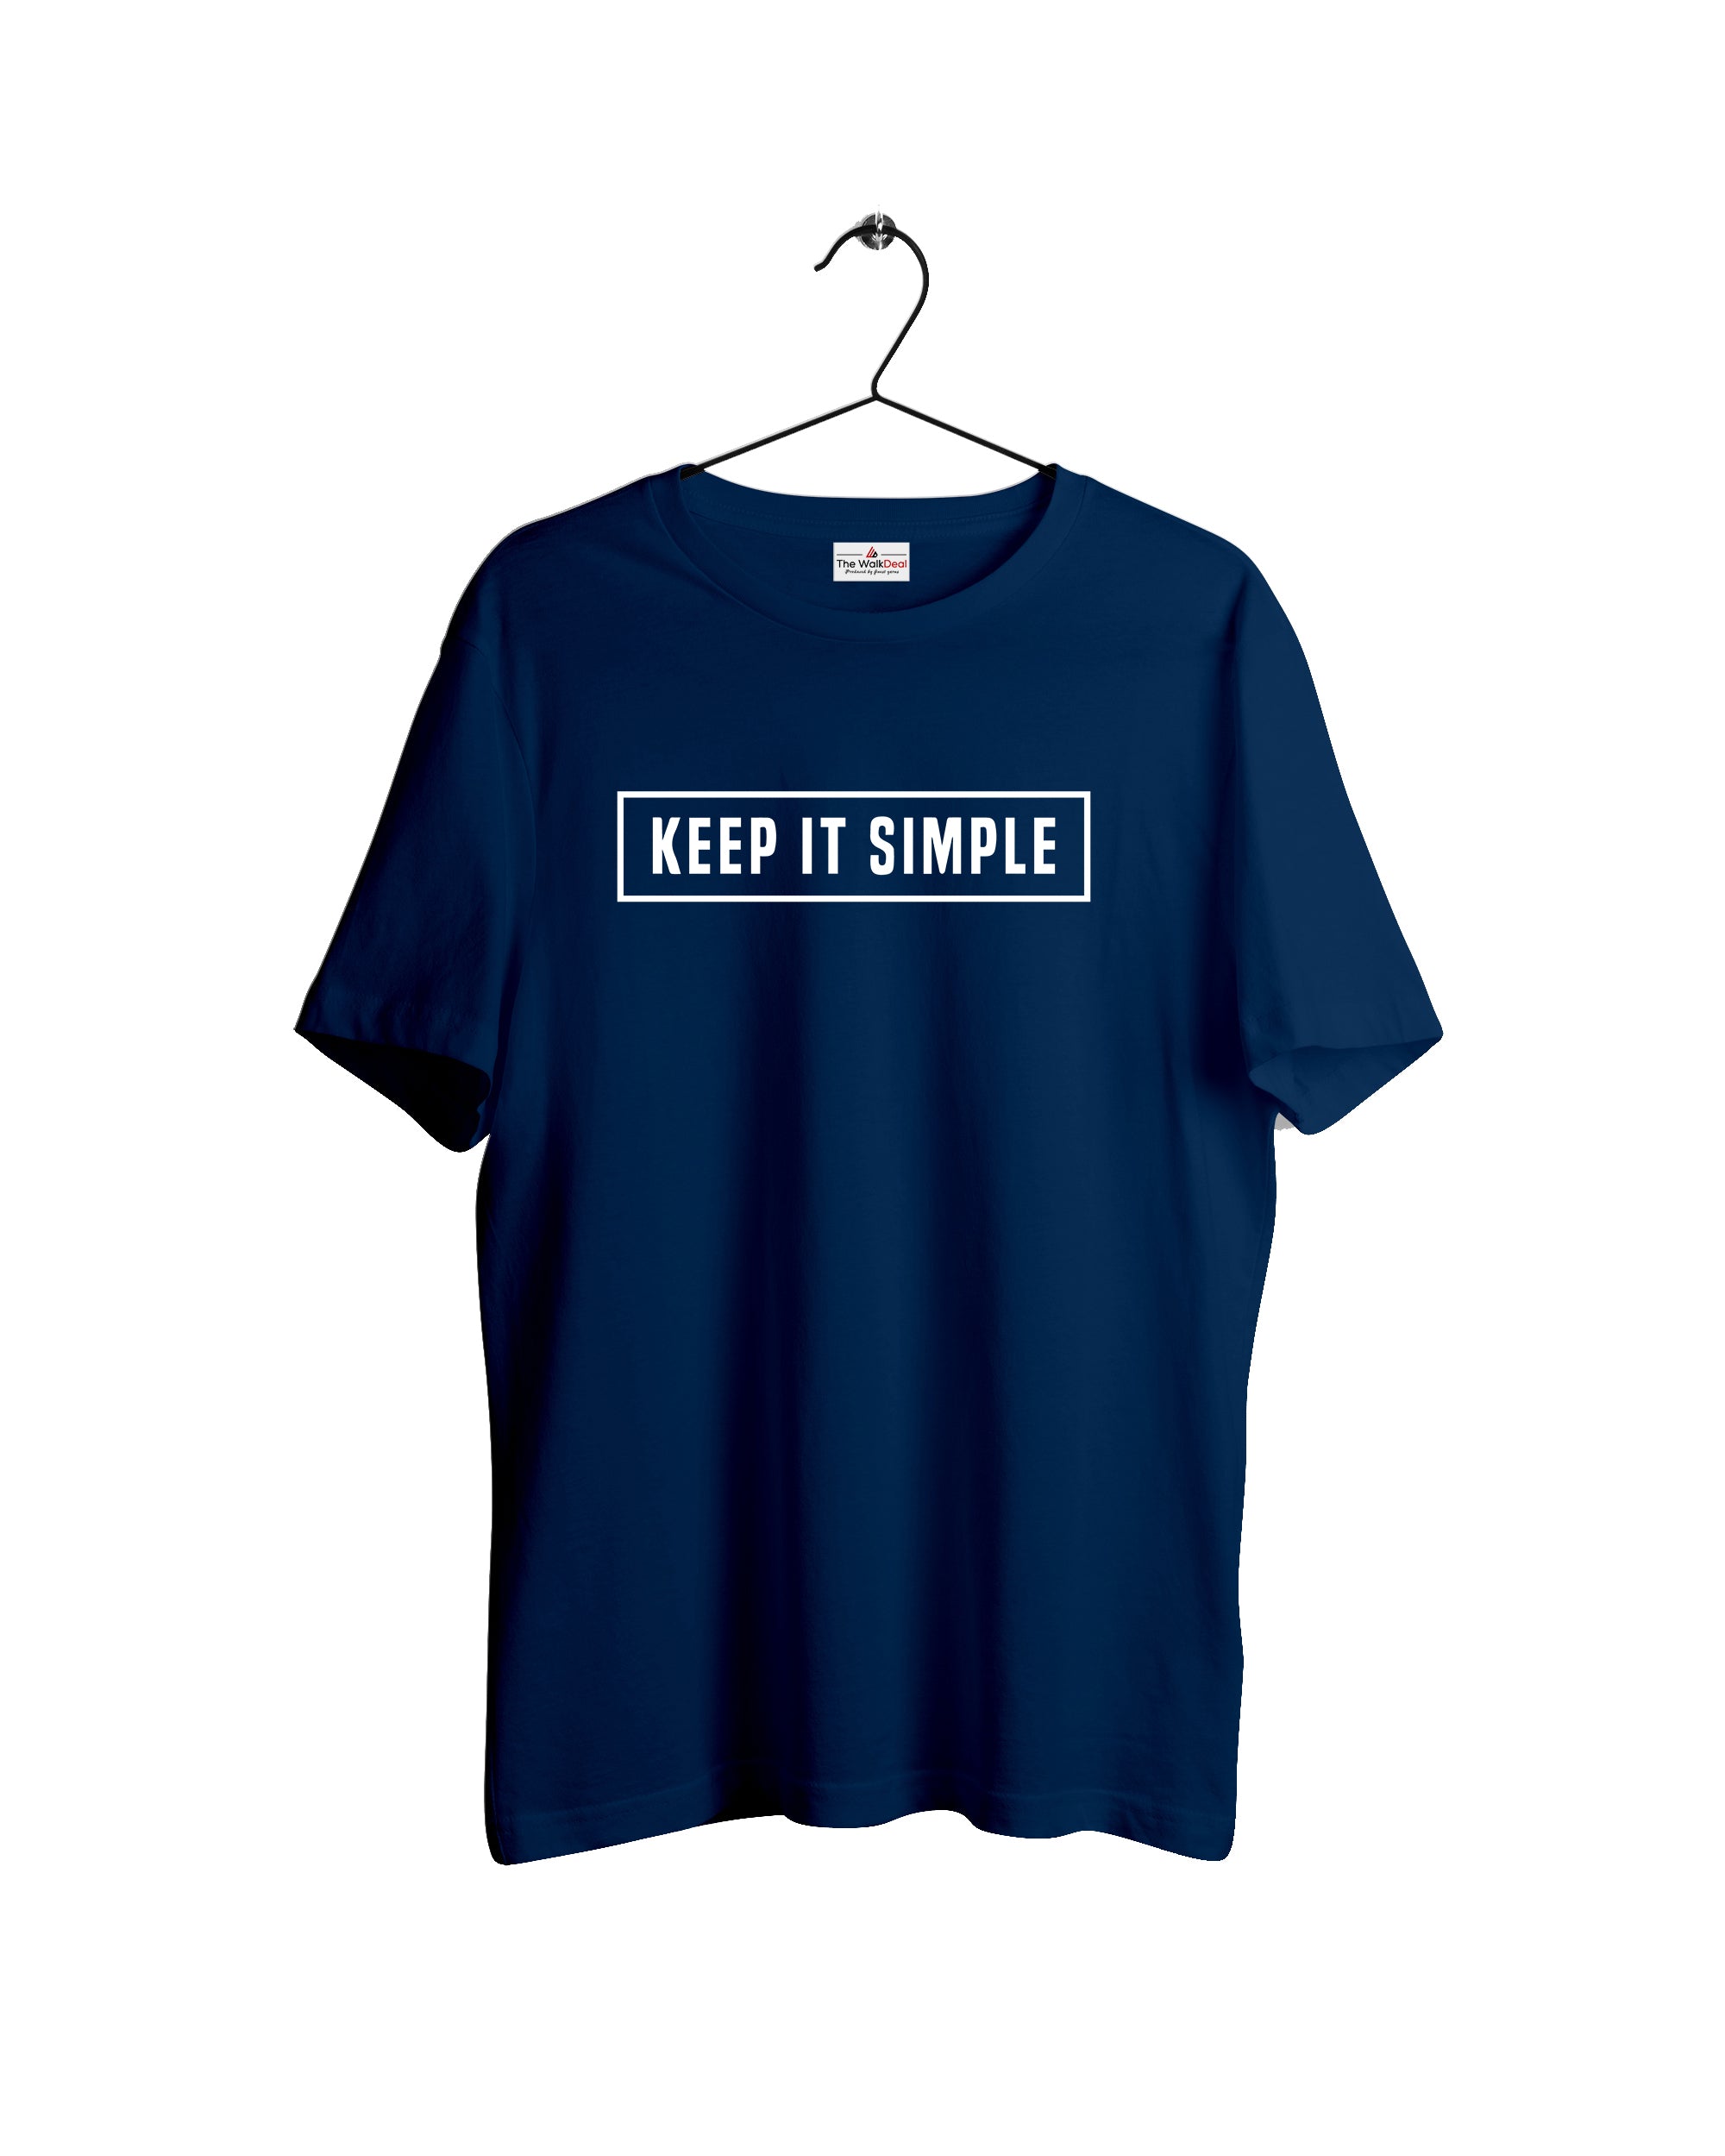 Keep It Simple T-Shirt For Men